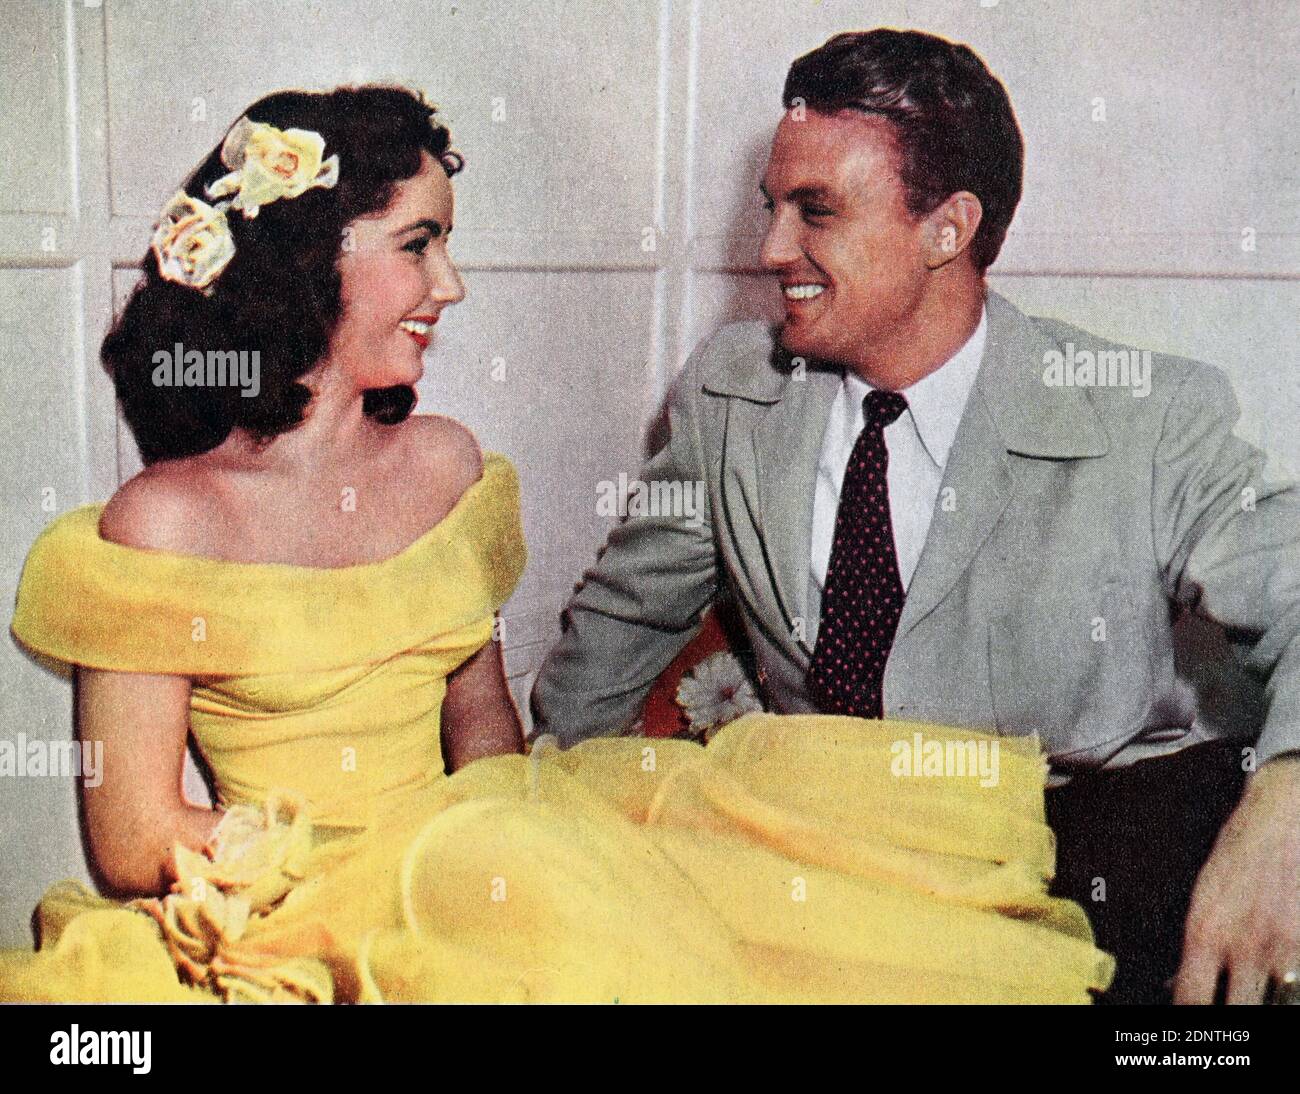 Film still from 'A Date with Judy' starring Jane Powell, Elizabeth Taylor, Carmen Miranda, Robert Stack, and Wallace Beery. Stock Photo